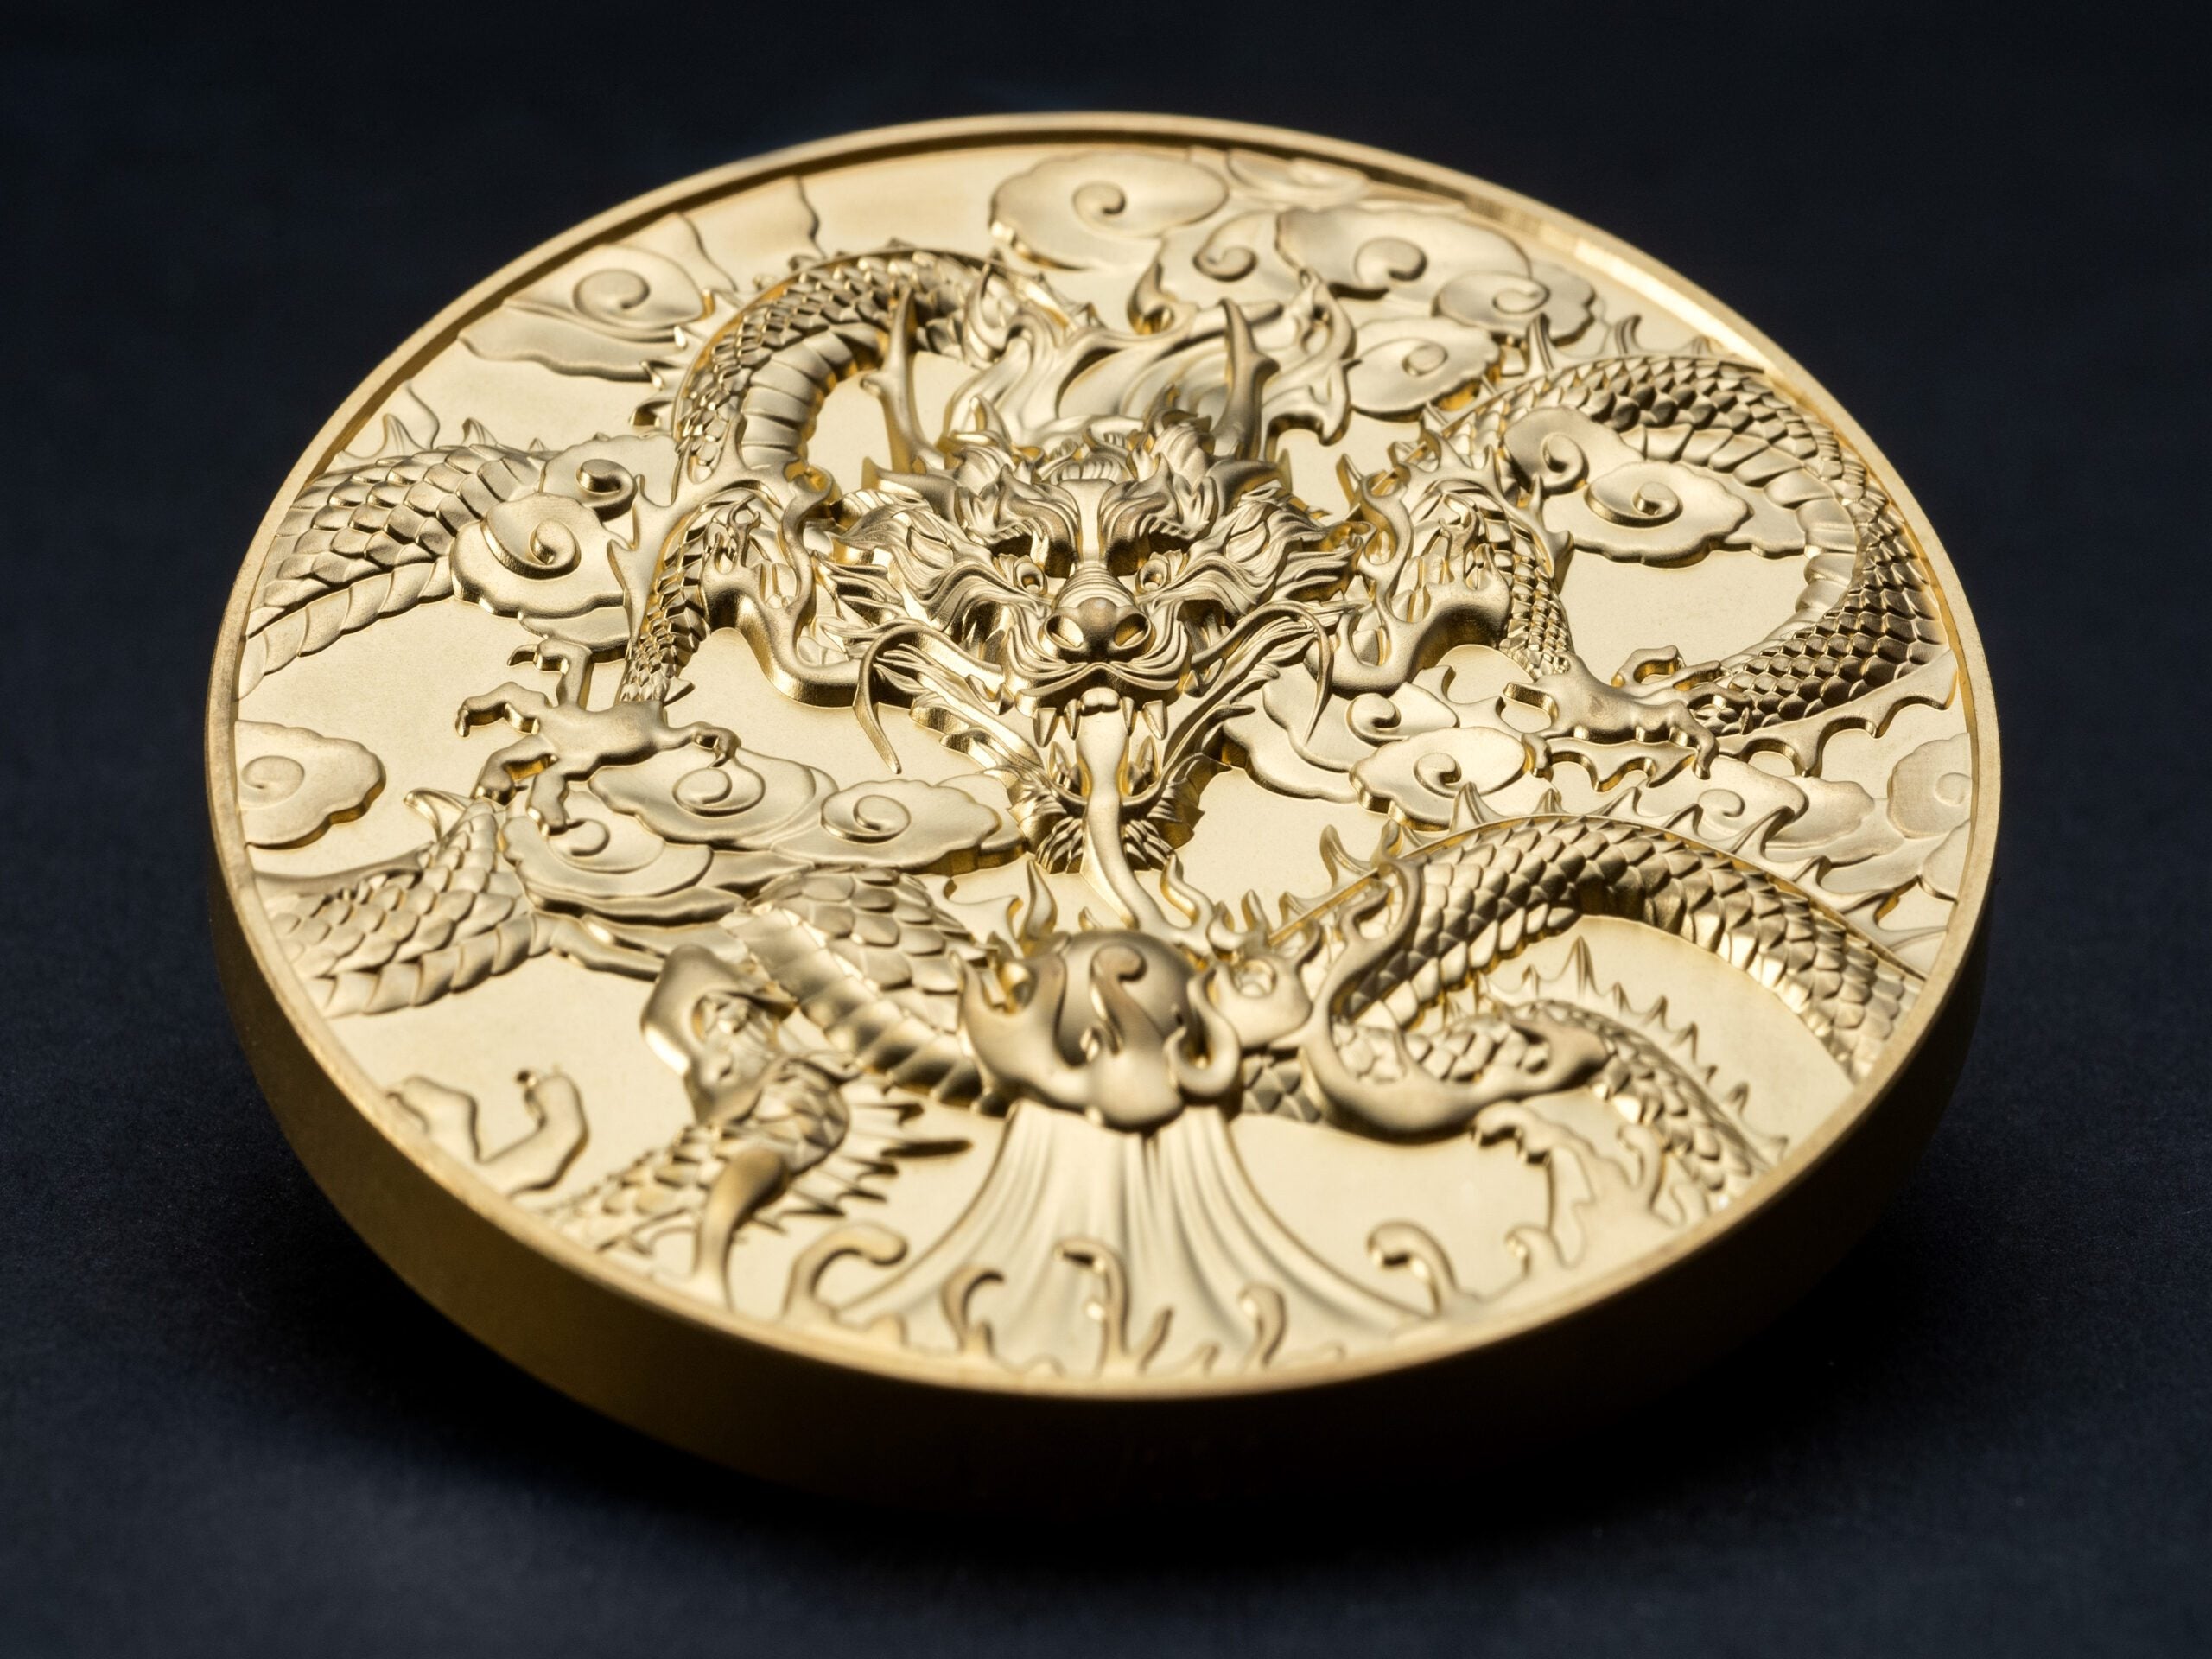 CHINESE DRAGON ART Gold Plated 5 Oz Silver Coin $10 Niue 2024